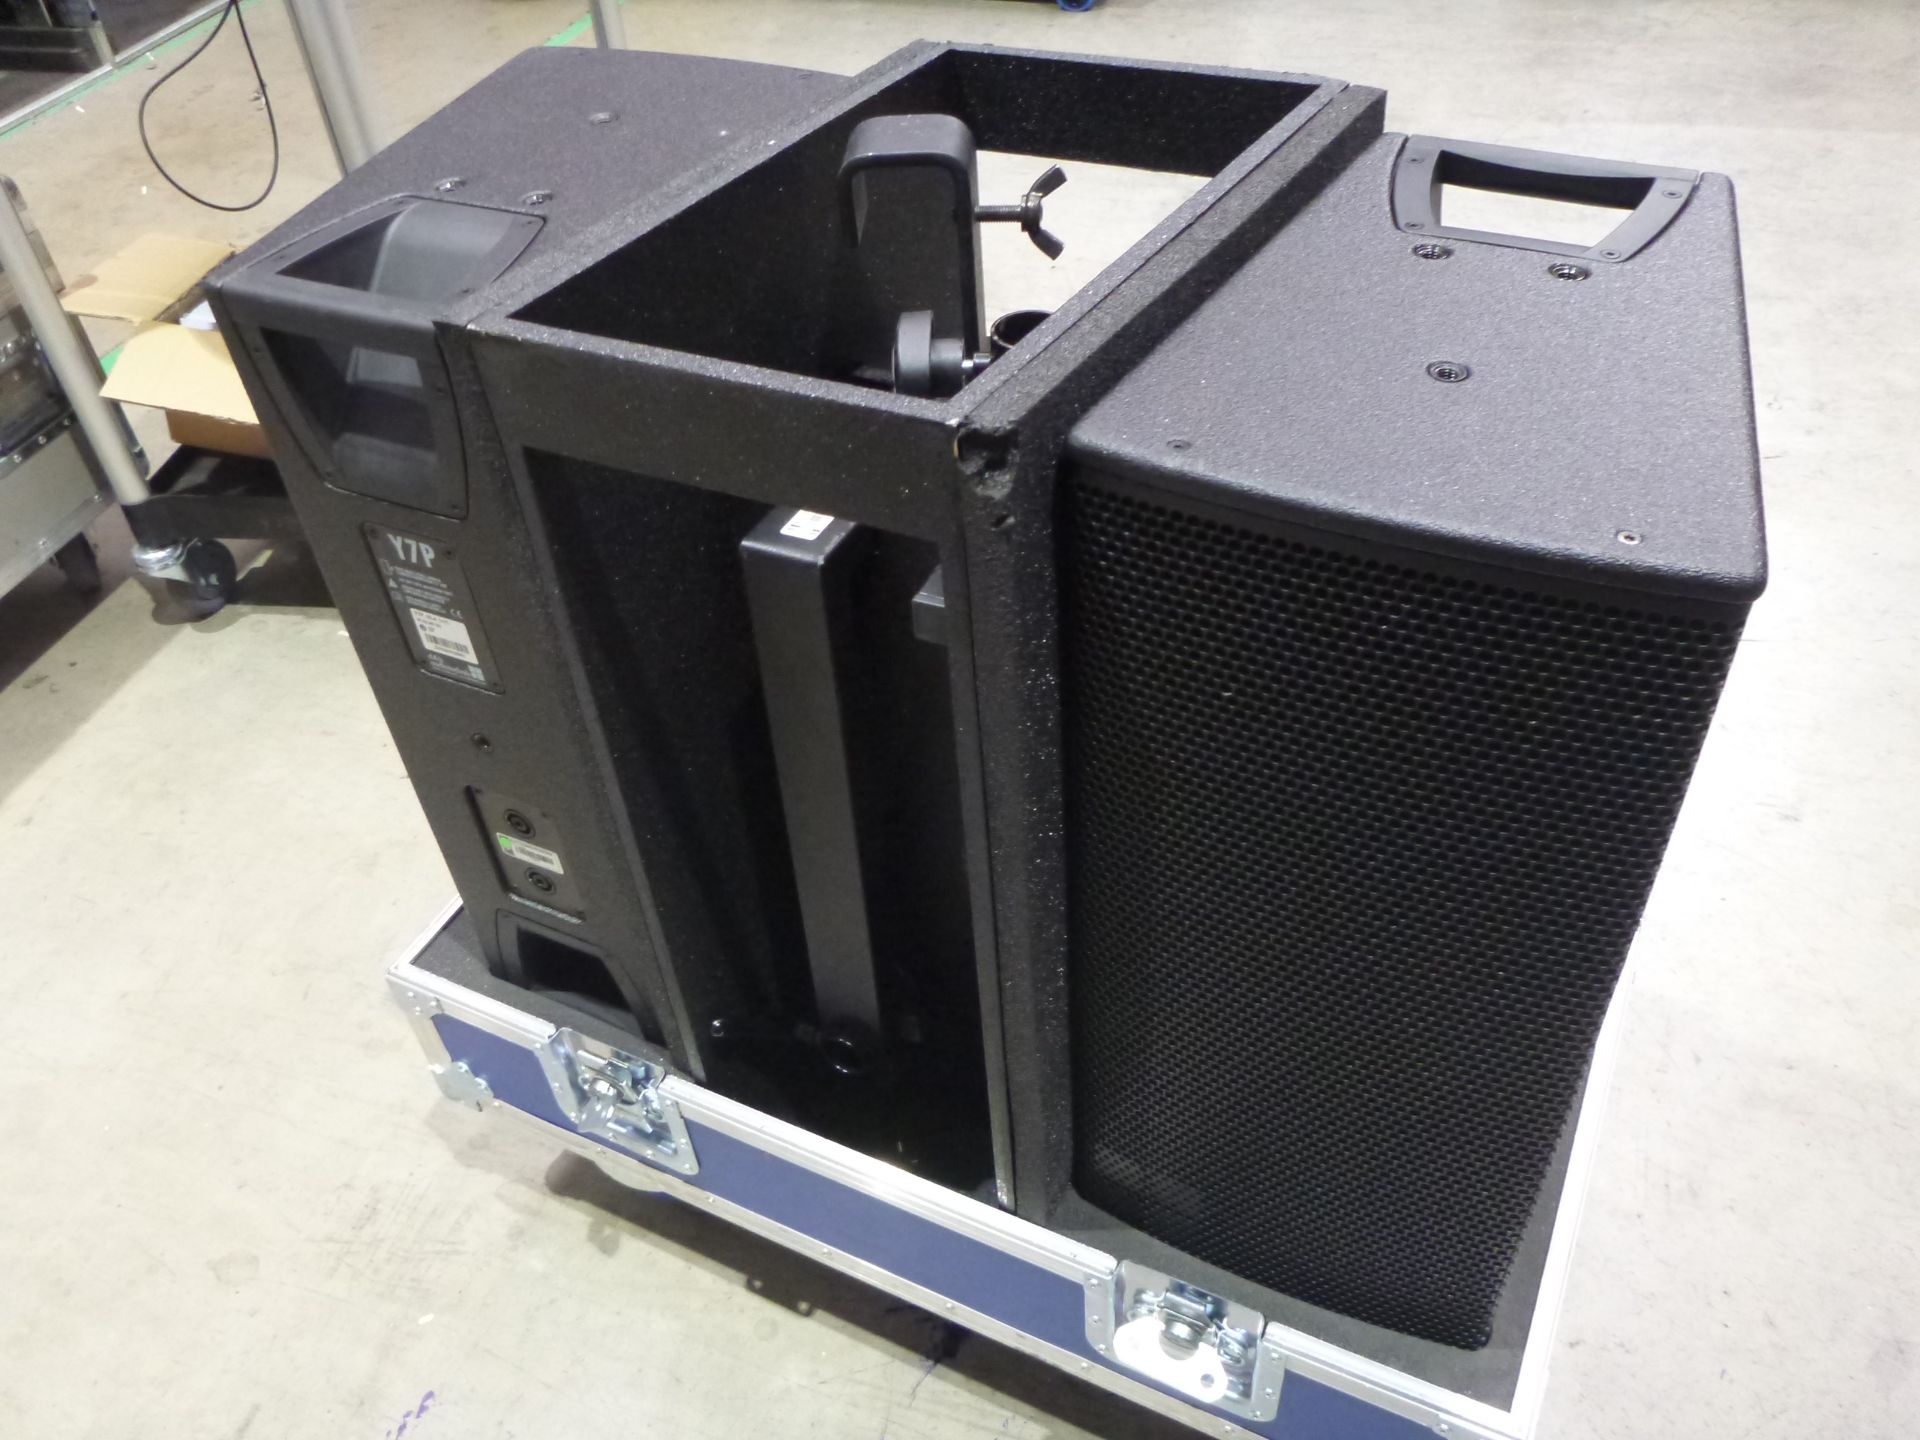 D & B Audiotecknik Y7P Loudspeakers (Pair) In flight case with flying frame, top hat and safety - Image 4 of 7